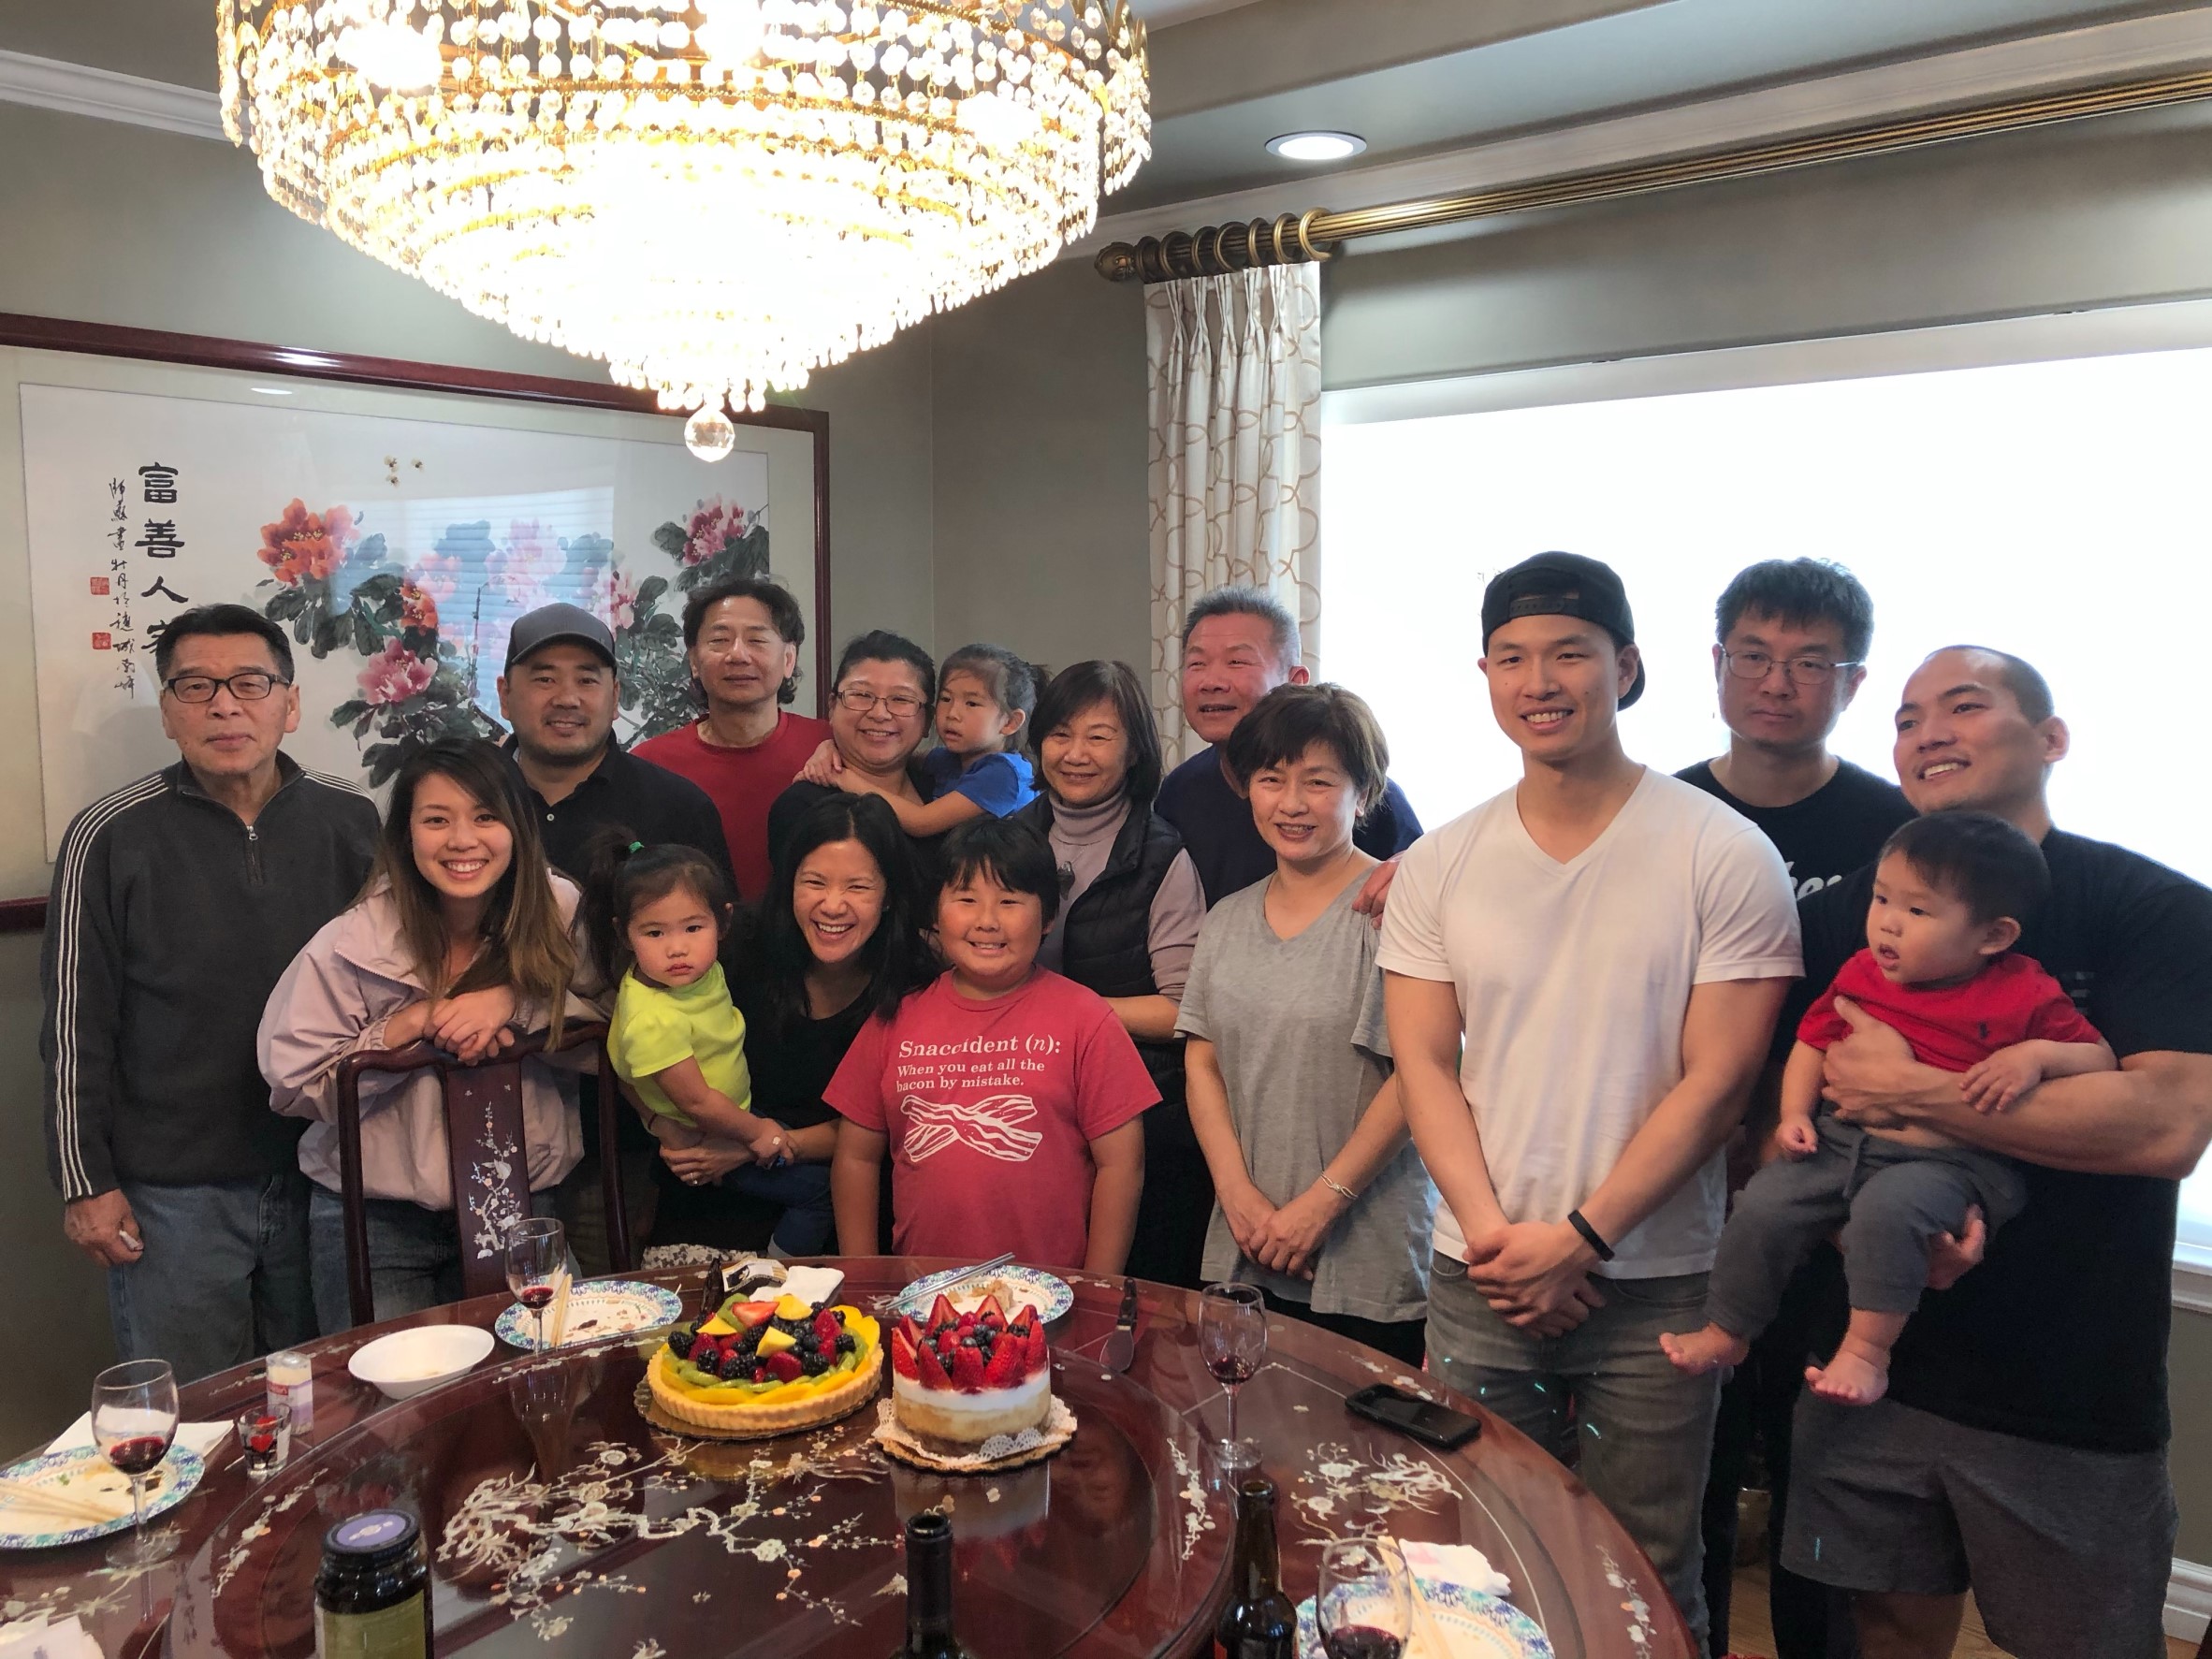 Large Asian American family of many generations stands around table full of food